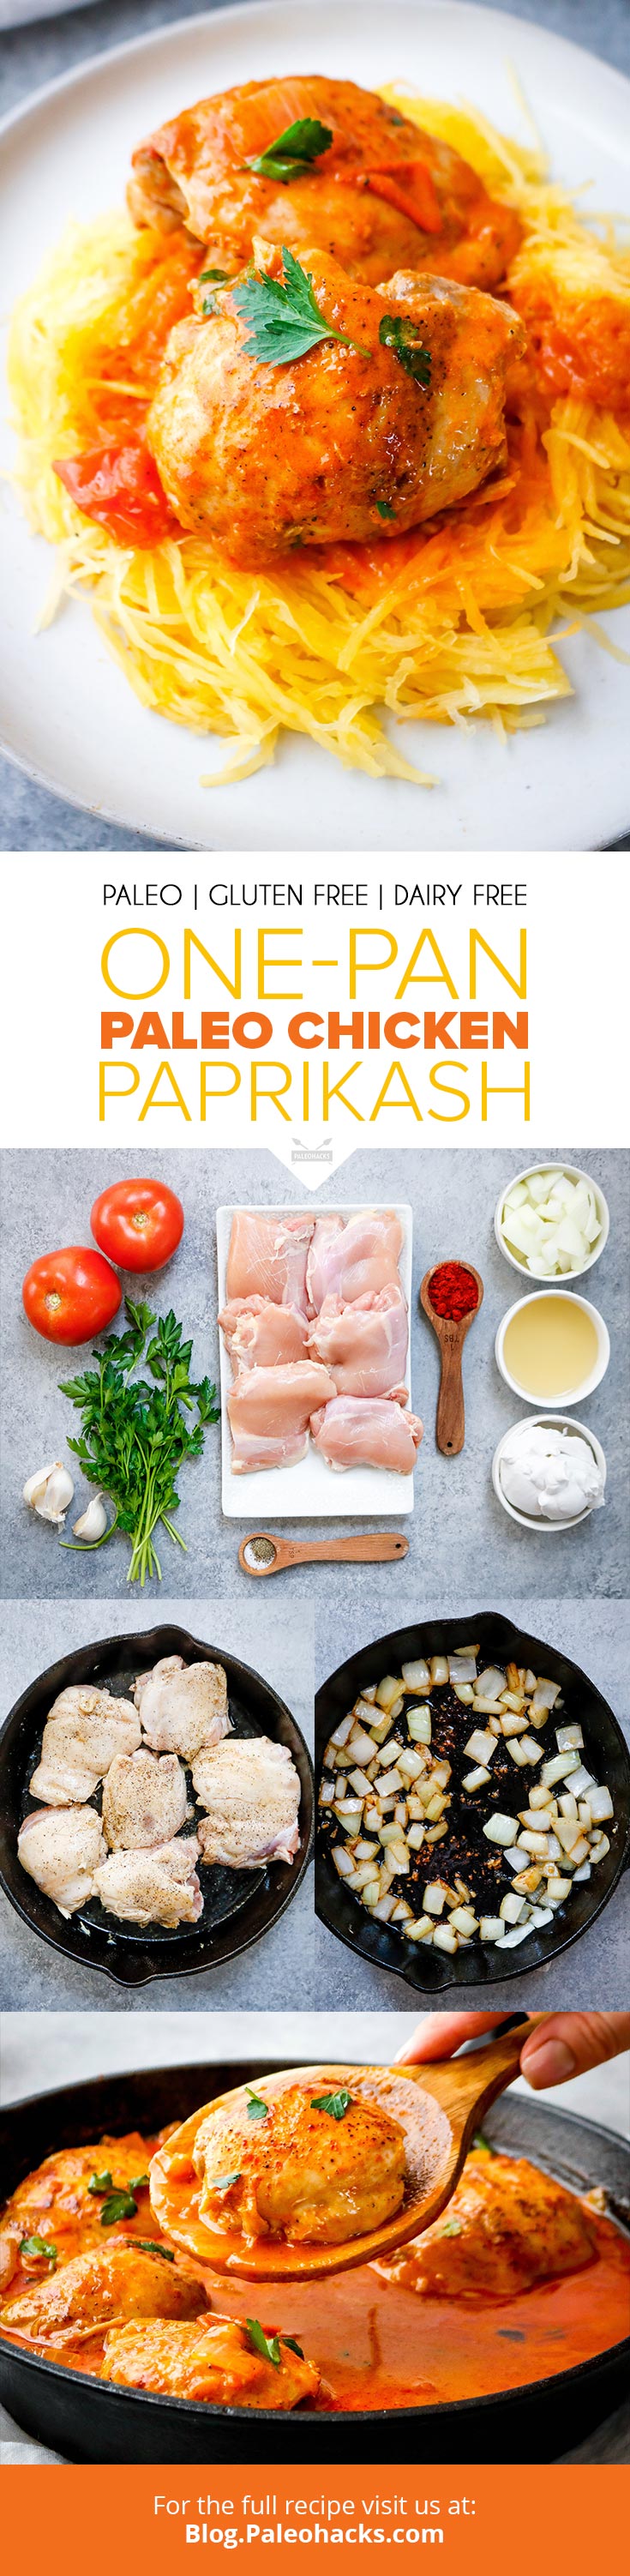 Cook up a fragrant, one-pan dinner with tender chicken smothered in a creamy paprika sauce filled with healthy fats. Chicken this good deserves a medal!